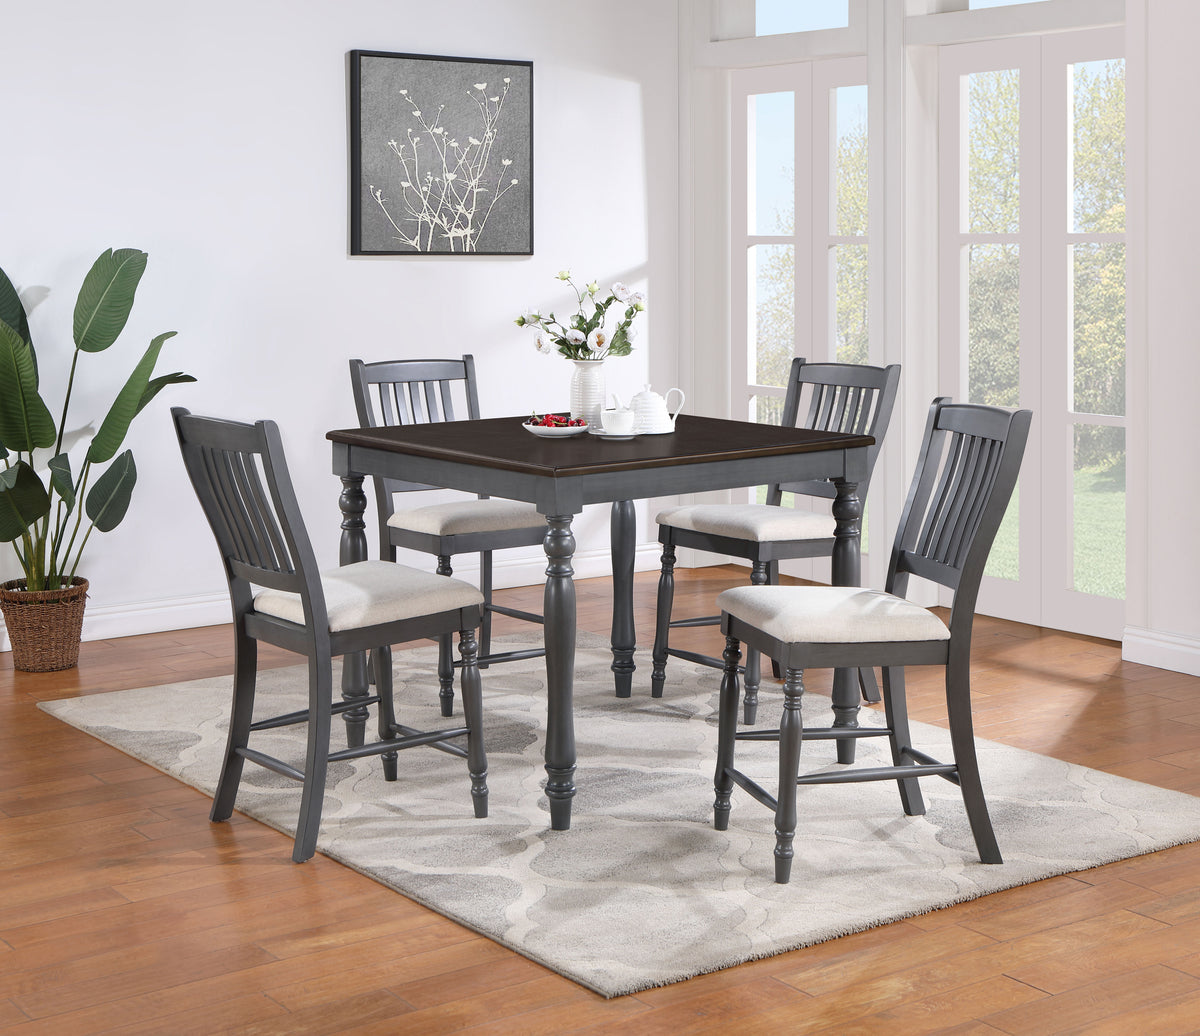 Wiley 5-piece Square Spindle Legs Counter Height Dining Set Beige and Grey Wiley 5-piece Square Spindle Legs Counter Height Dining Set Beige and Grey Half Price Furniture